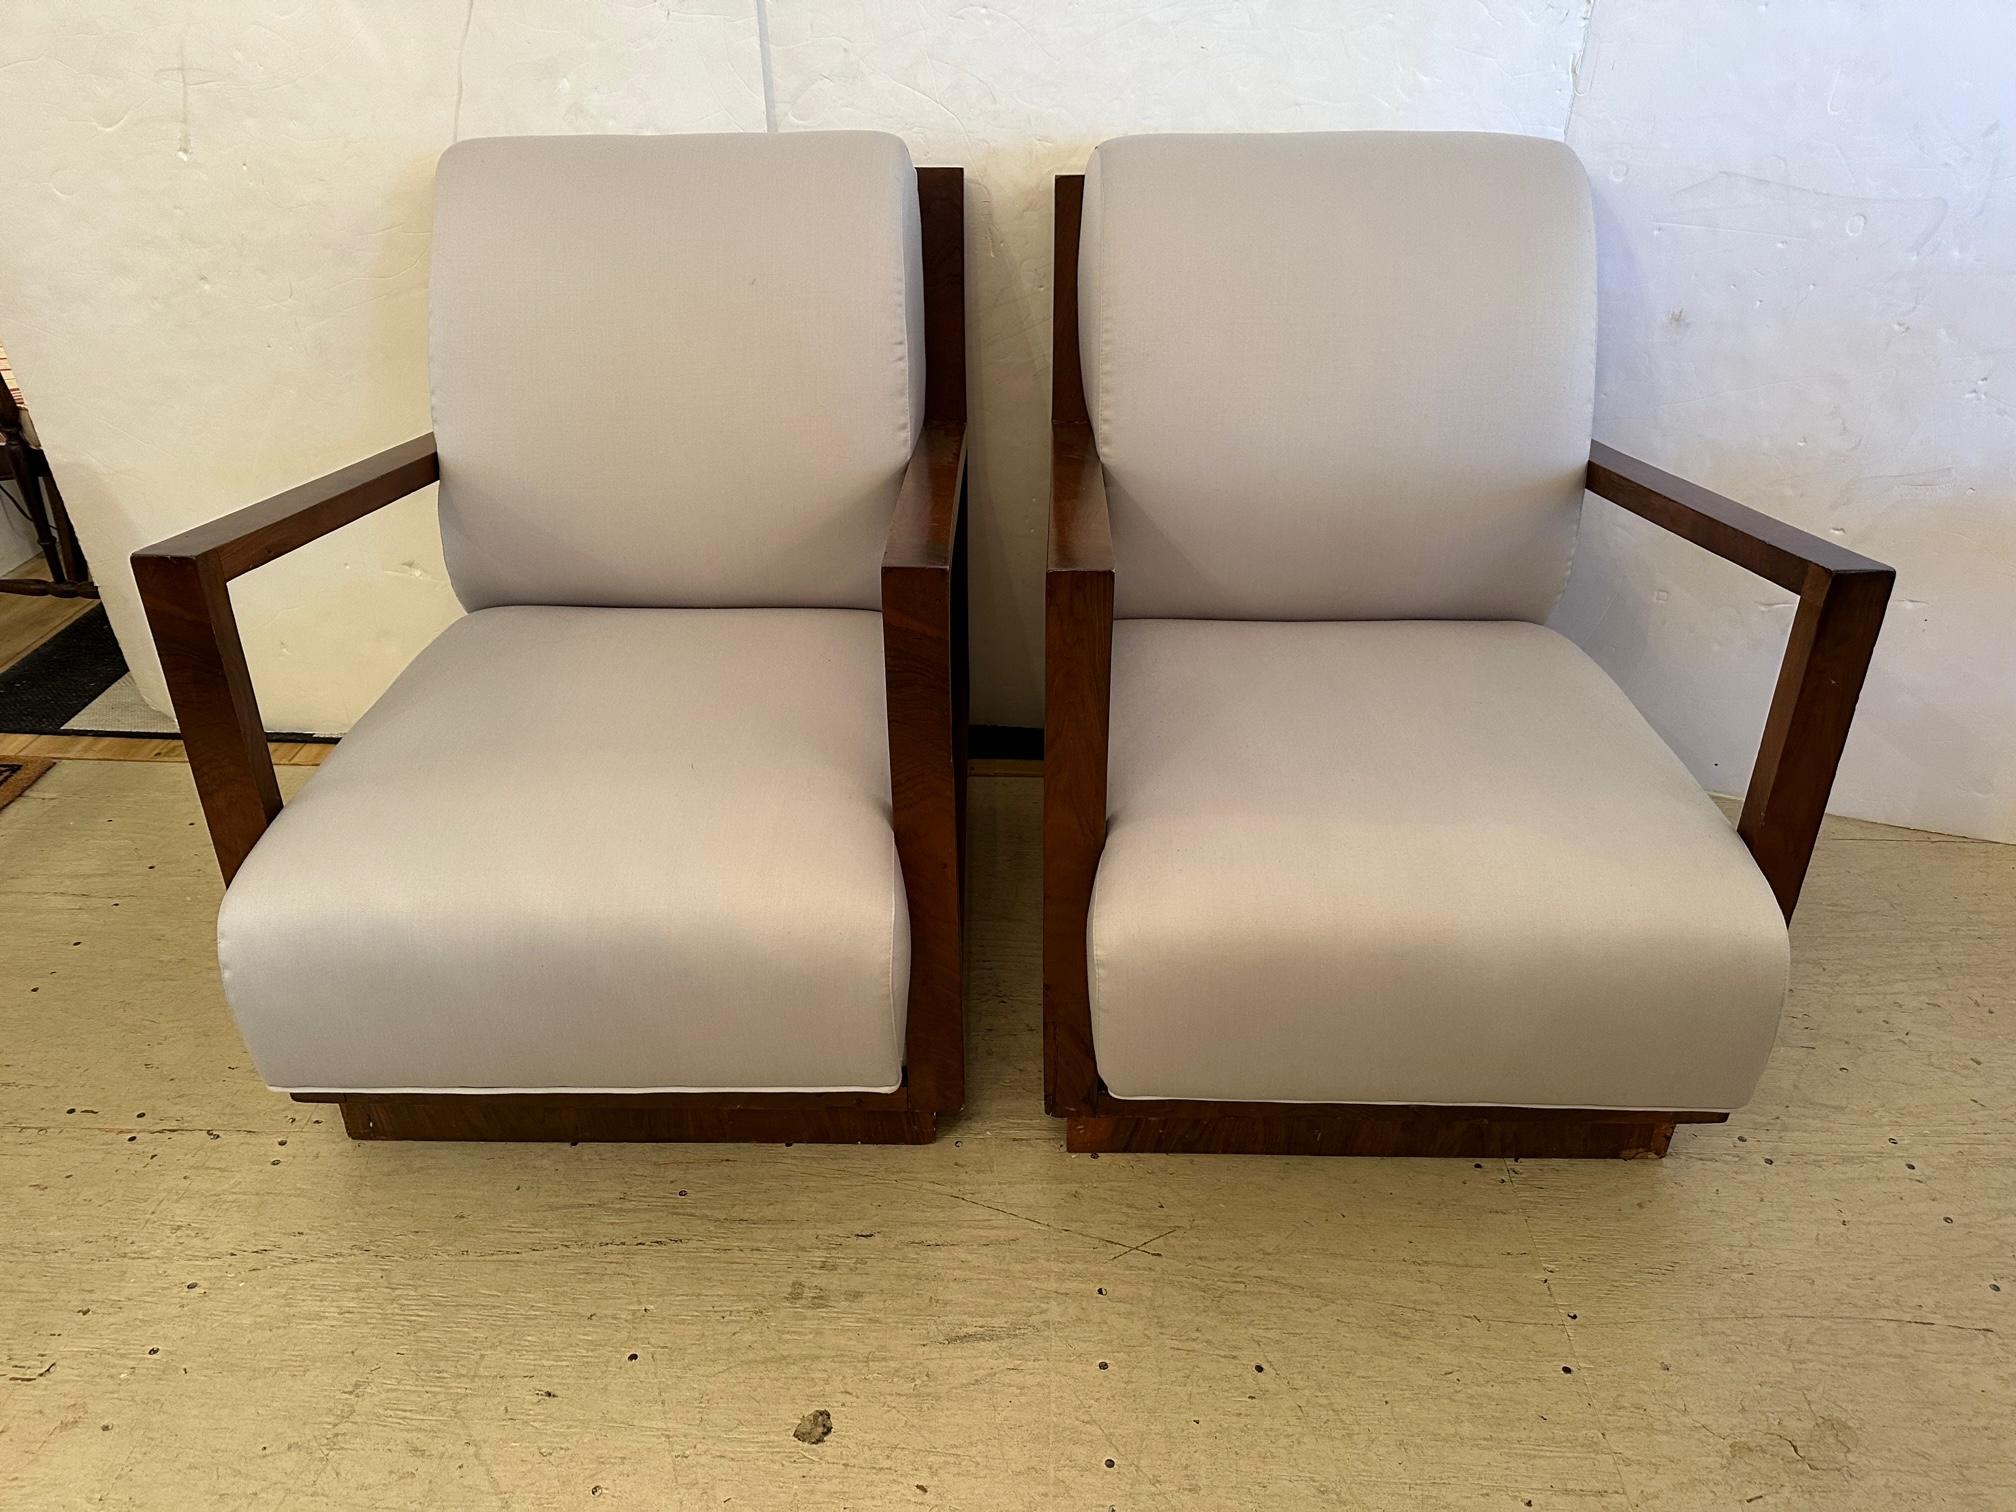 Pair of large elegant French antique Art Deco chairs having gorgeously grained mahogany frames, especially beautiful from the back, recently upholstered in neutral greige (greyish beige) cotton blend.

Arm: 24” H
Seat:  20.5” D x 15” H